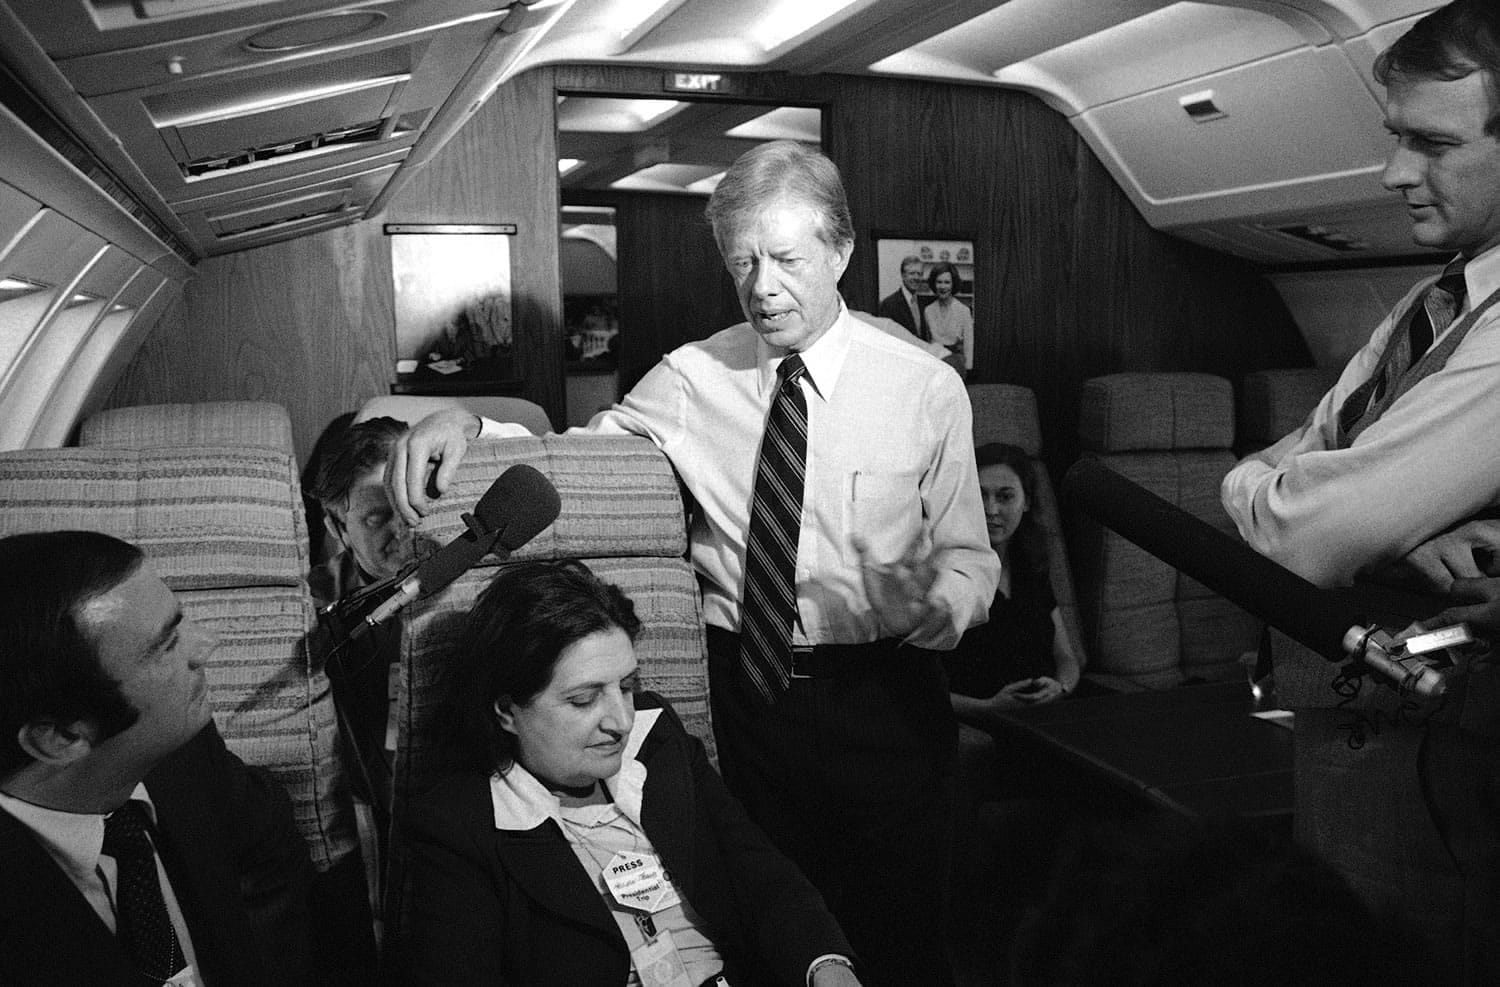 President Jimmy Carter and press secretary Jody Powell, right, talk with reporters Helen Thomas, center, and Sam Donaldson, left, while aboard Air Force One prior on Oct. 20, 1979 to landing at Andrews Air Force Base, Md. Thomas, a pioneer for women in journalism and an irrepressible White House correspondent, has died Saturday.